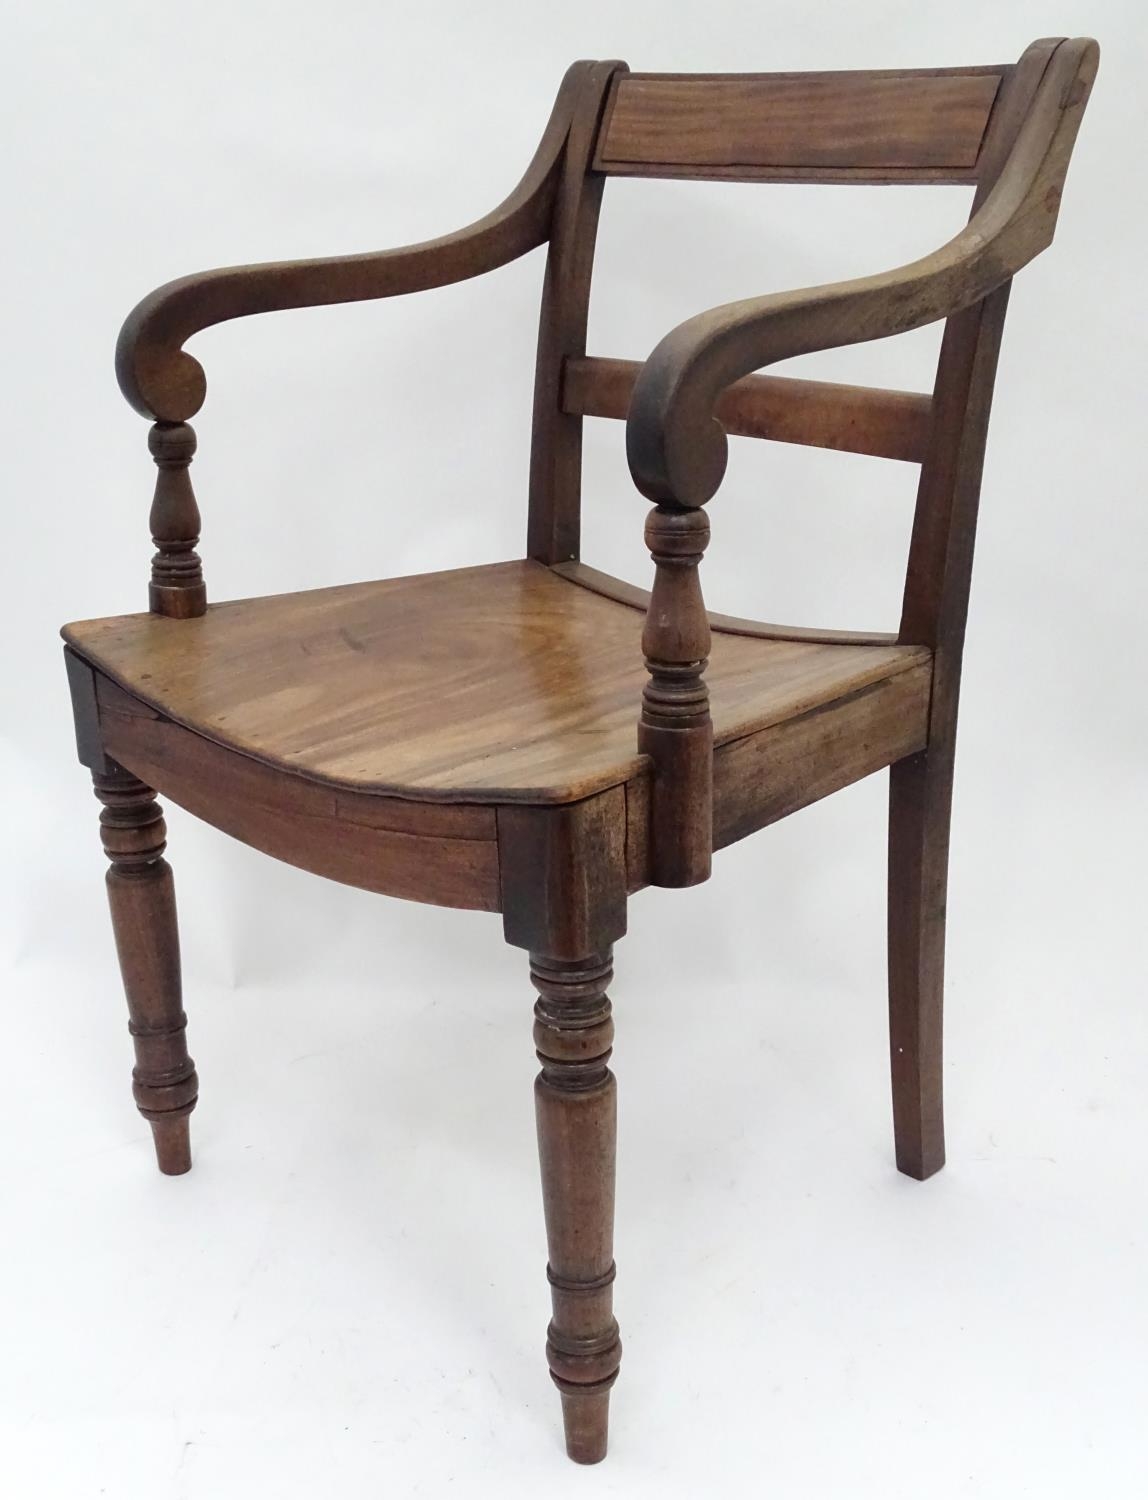 A Regency mahogany carver chair Please Note - we do not make reference to the condition of lots - Image 4 of 4